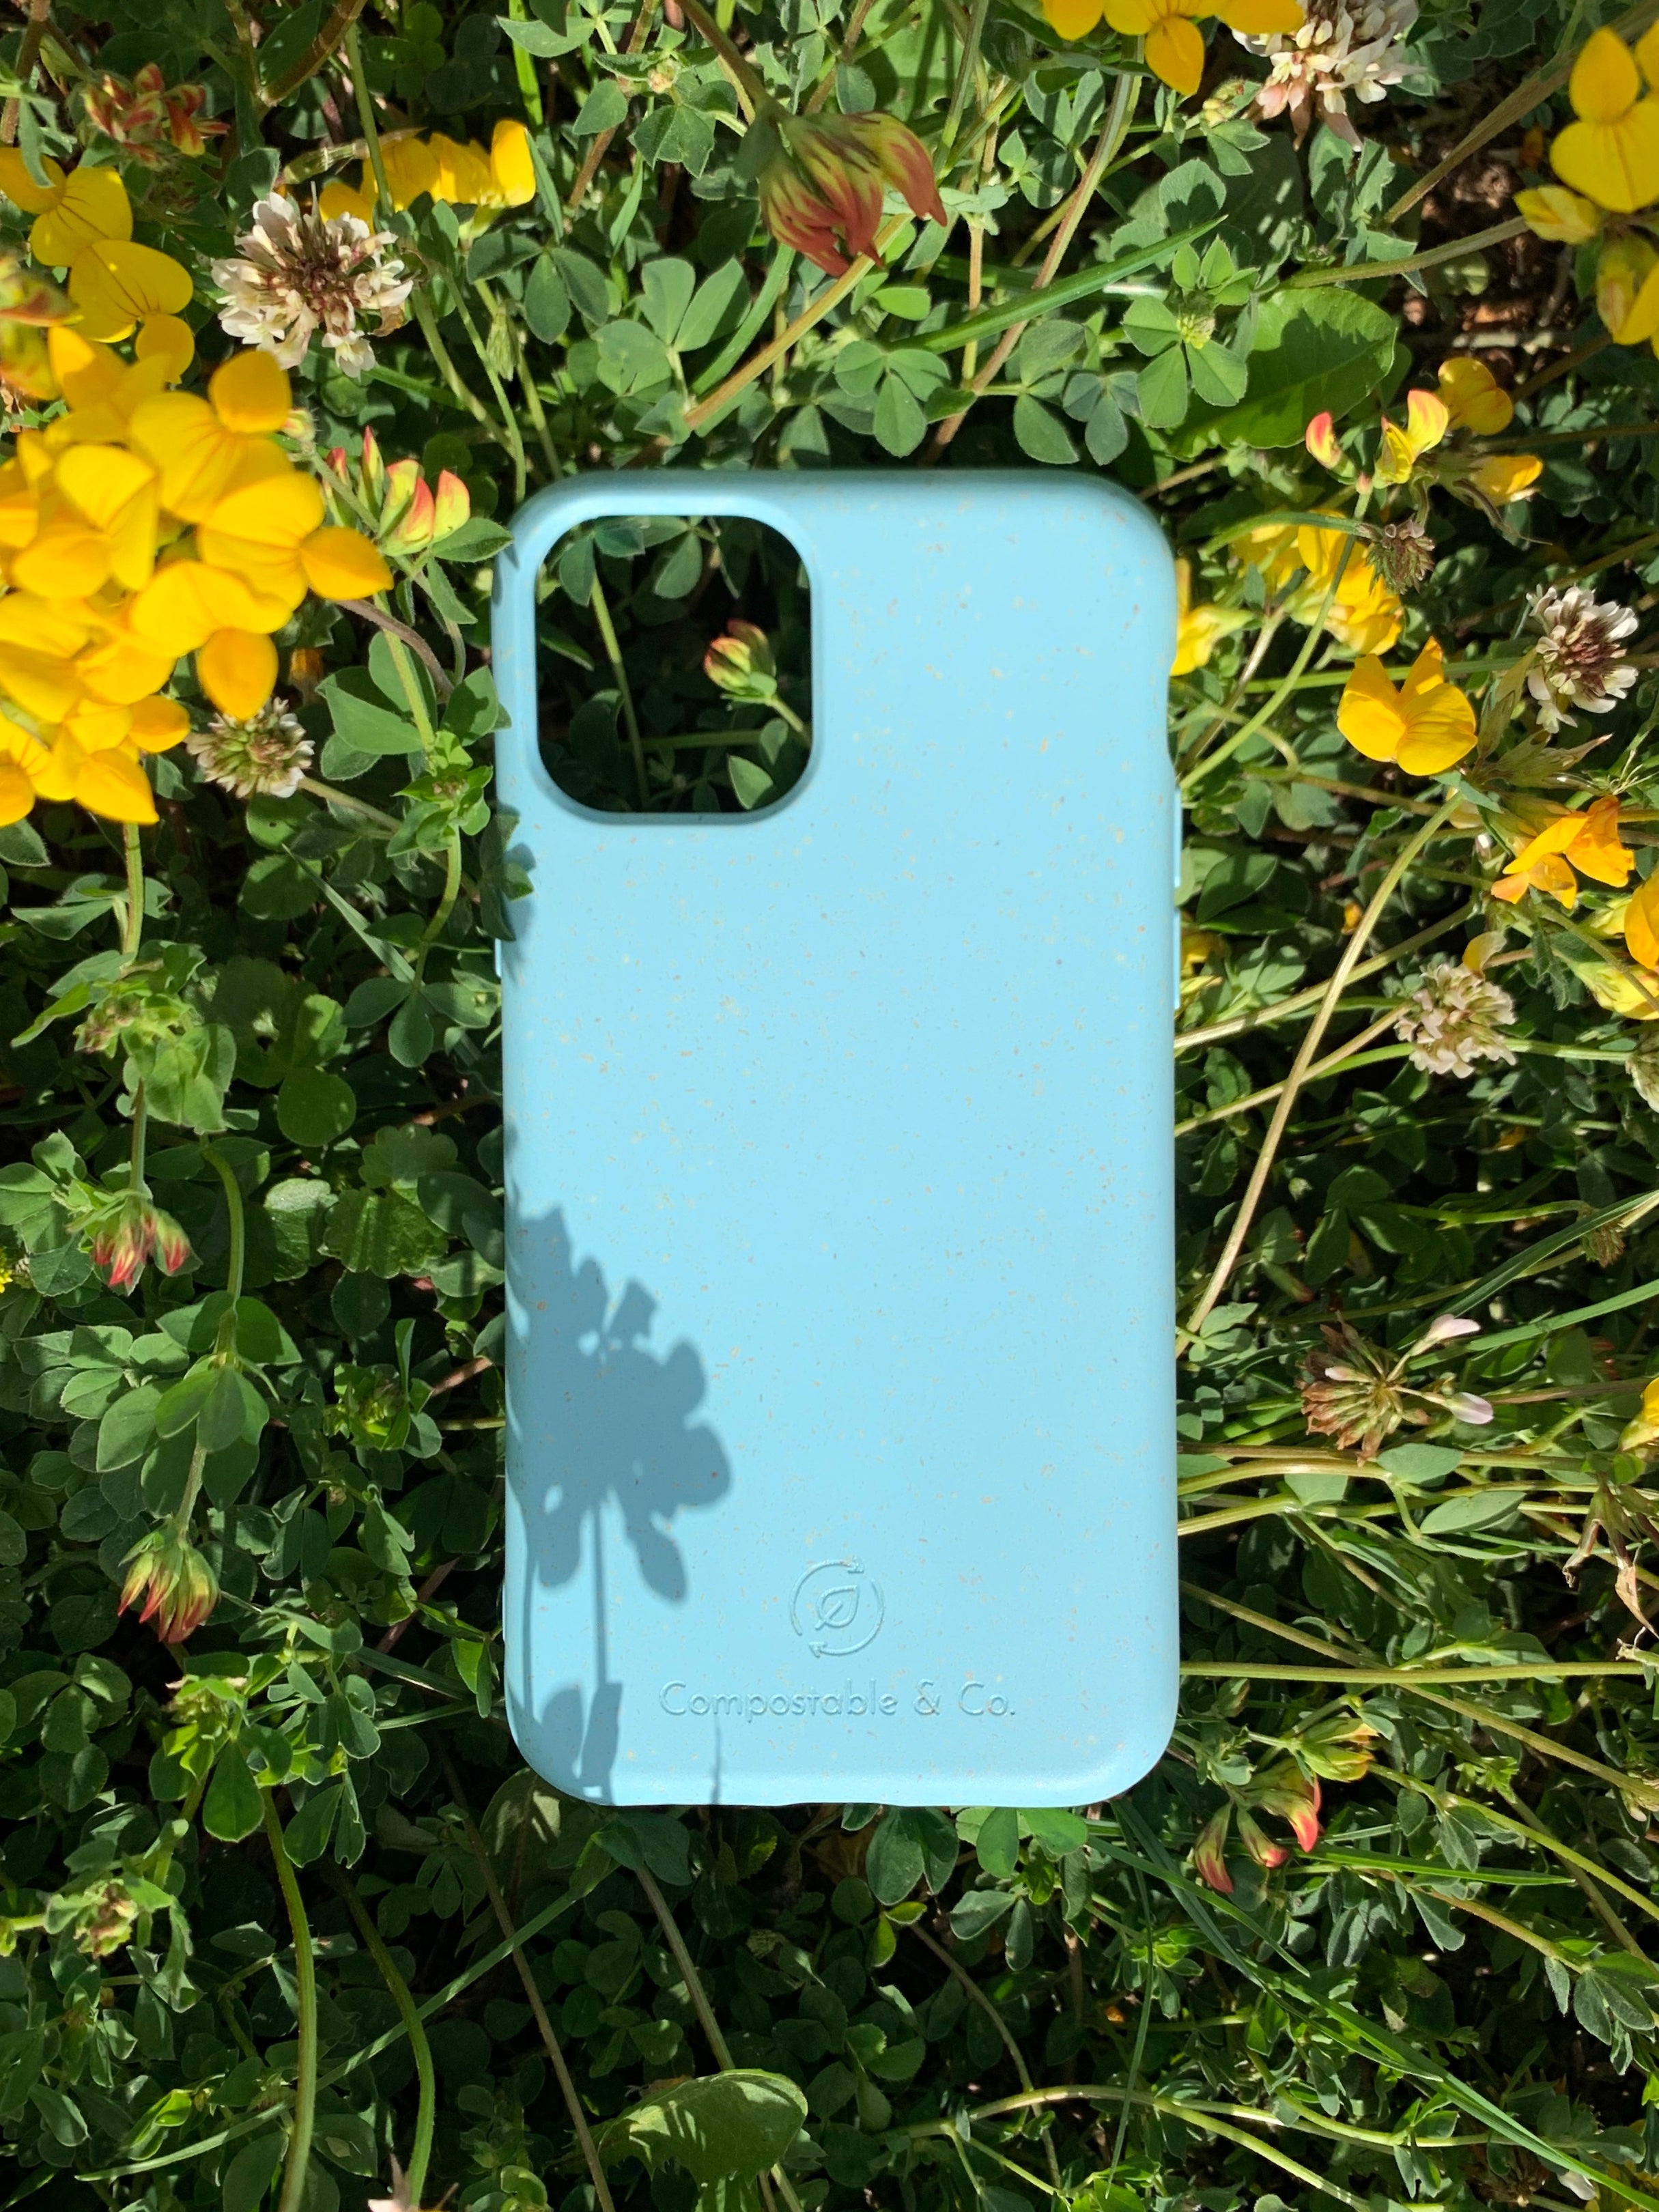 Compostable & Co. iPhone 11 pro blue biodegradable phone case with natural background